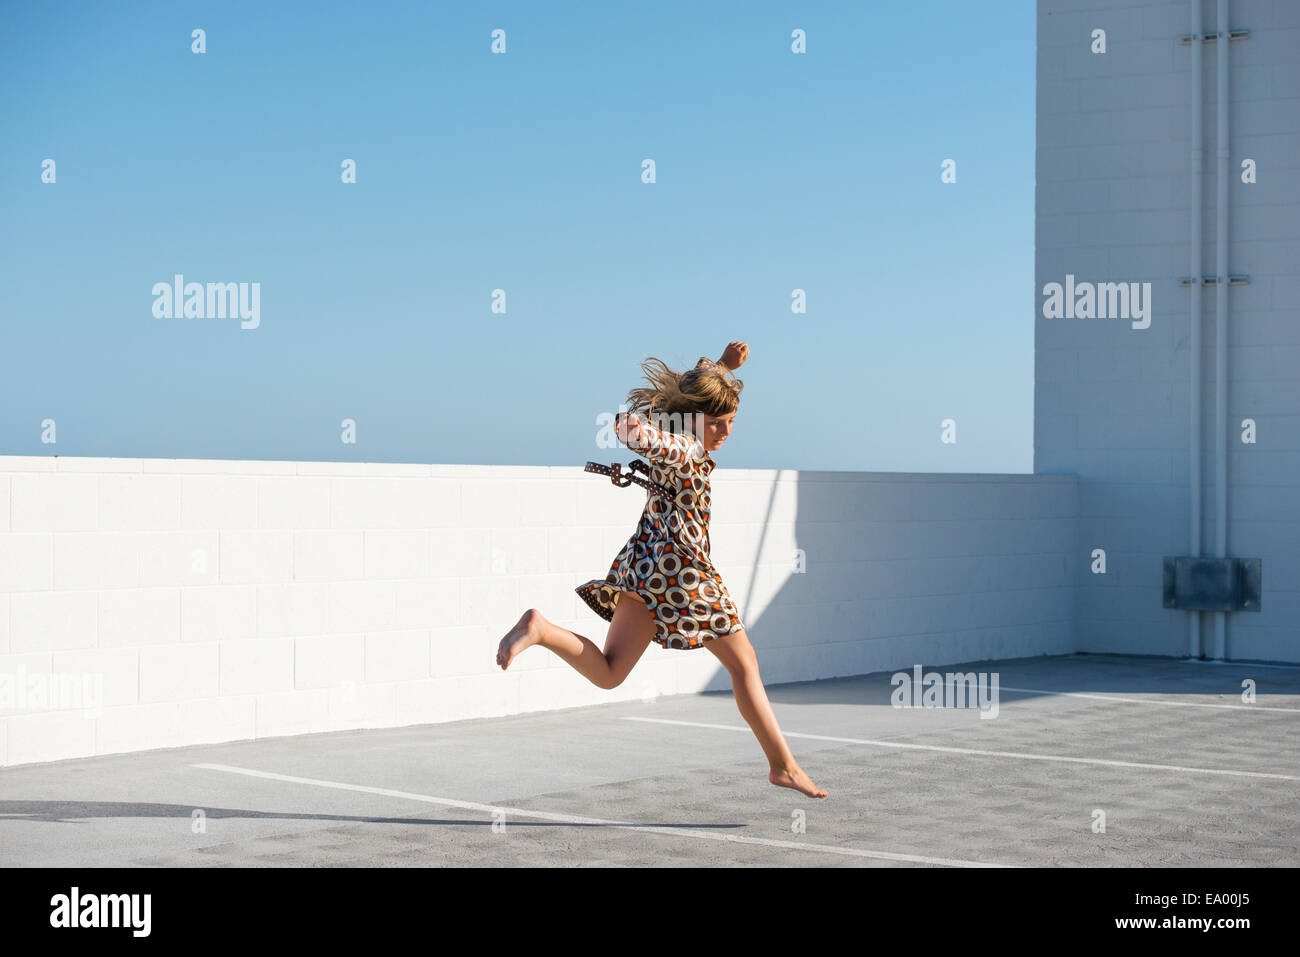 Girl jumping barefoot on building rooftop Stock Photo